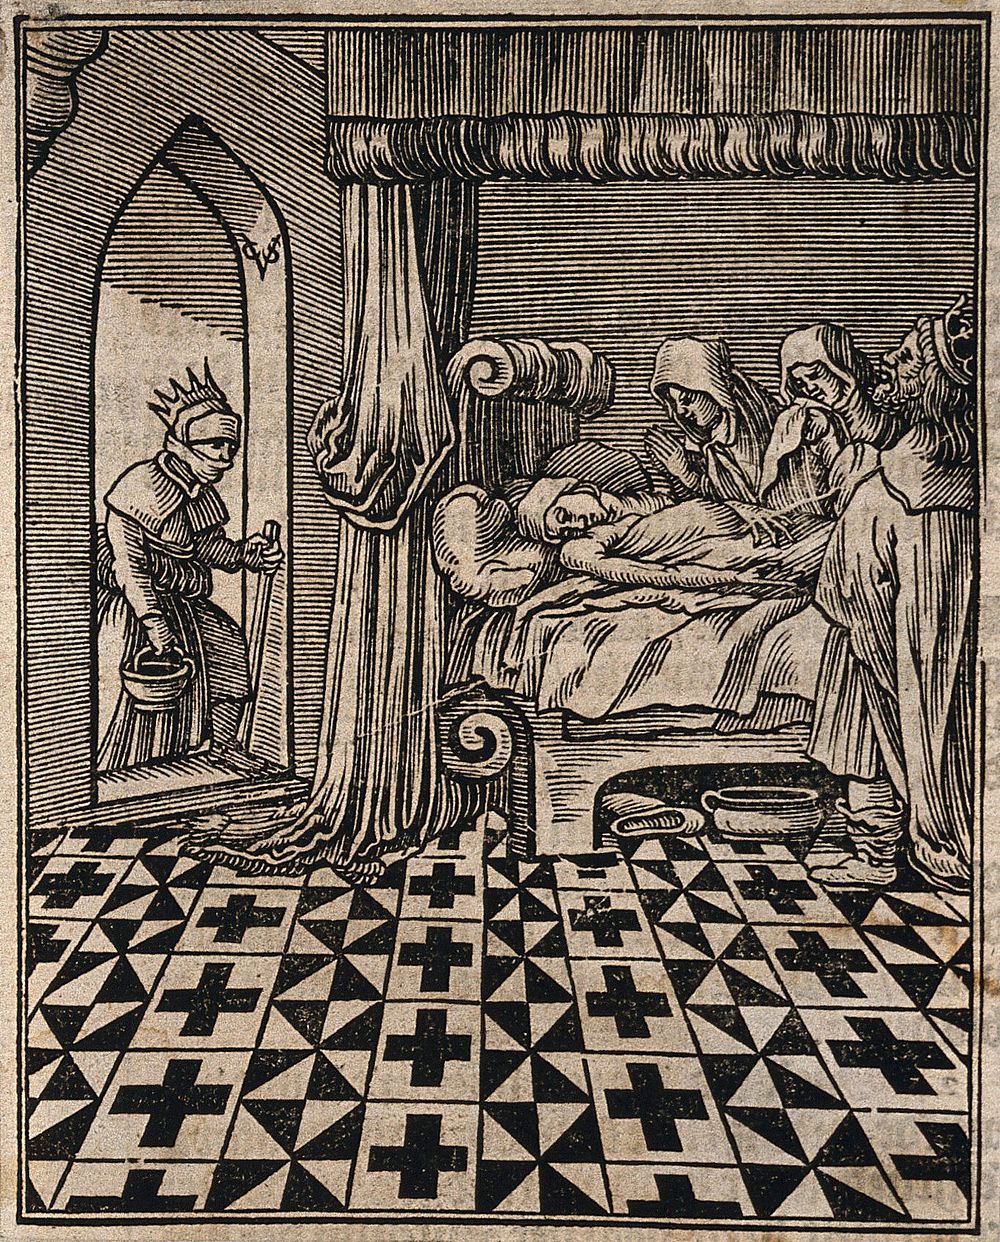 Two hooded figures and a king grieve over a dead person while a masked woman enters the room with a bowl and a stick.…